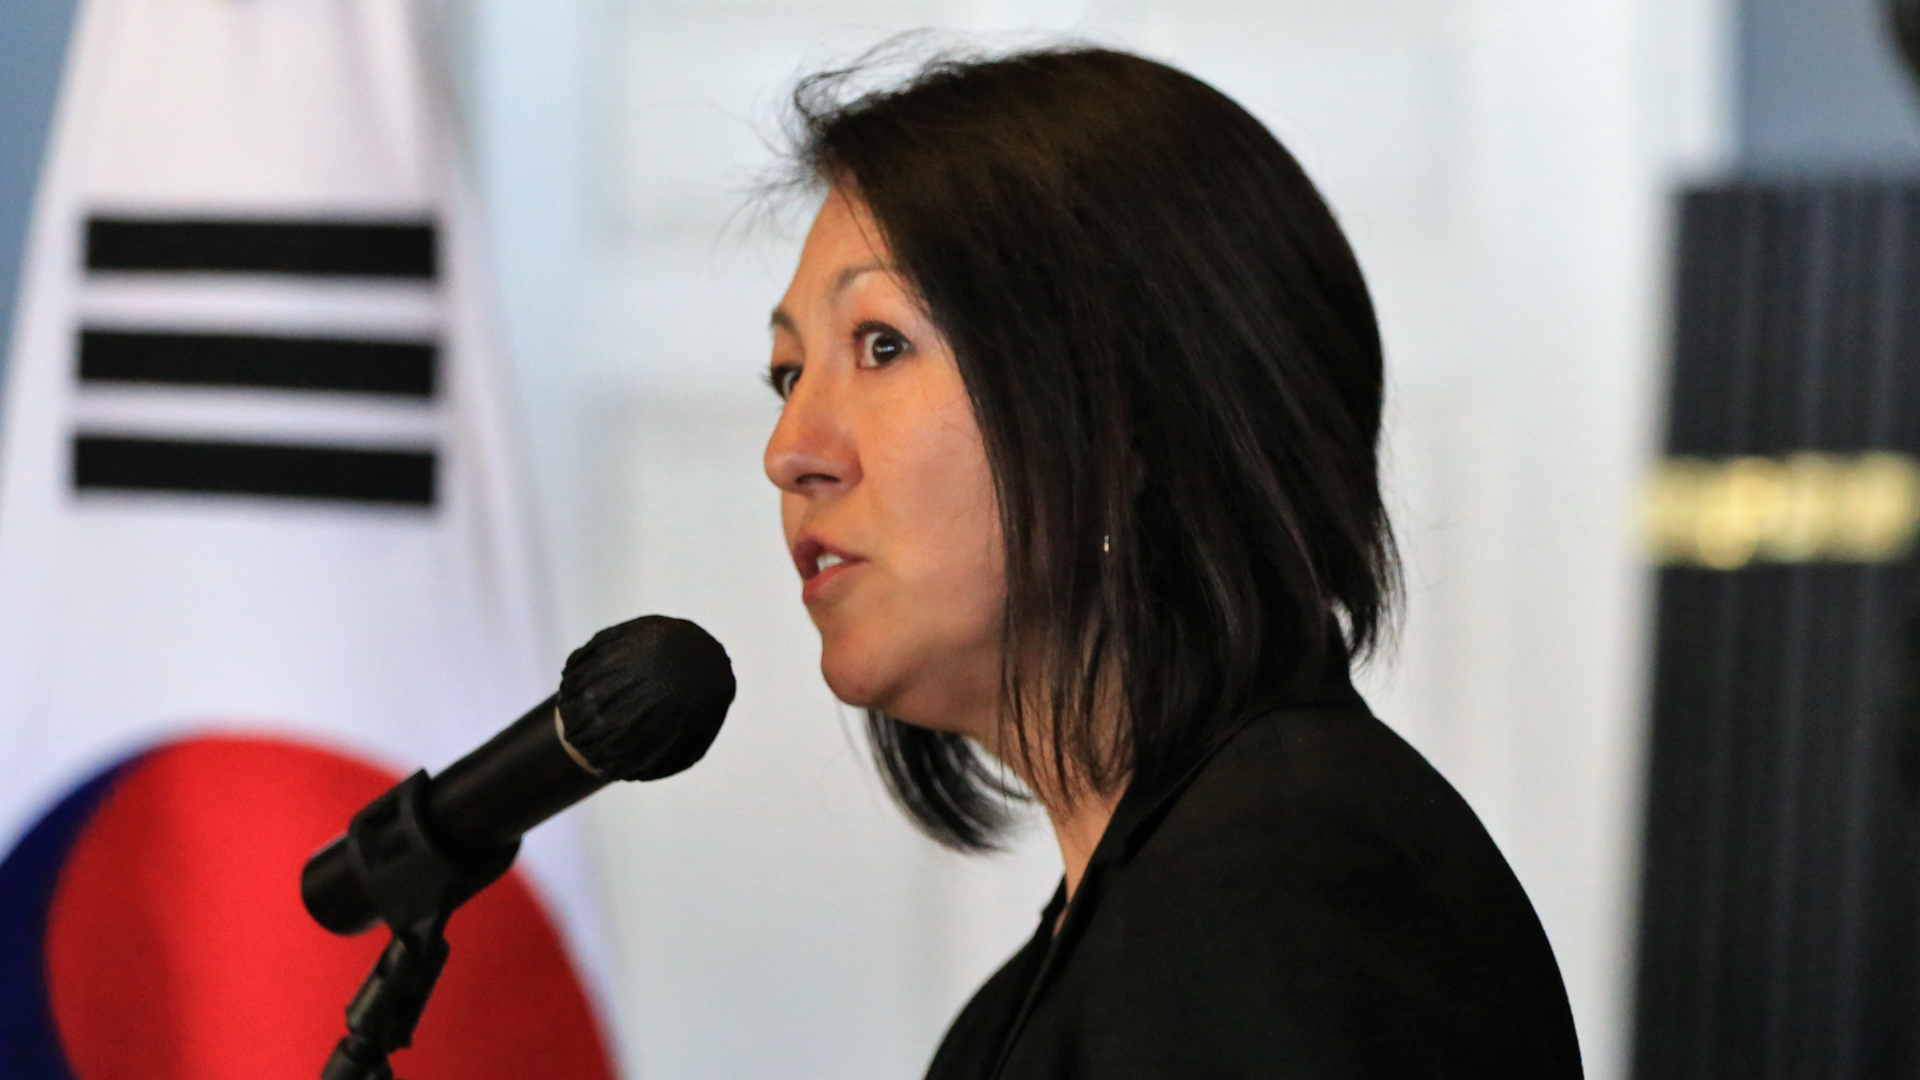 A woman with chin-length dark hair speaks into a microphone, with a Korean flag in background. 